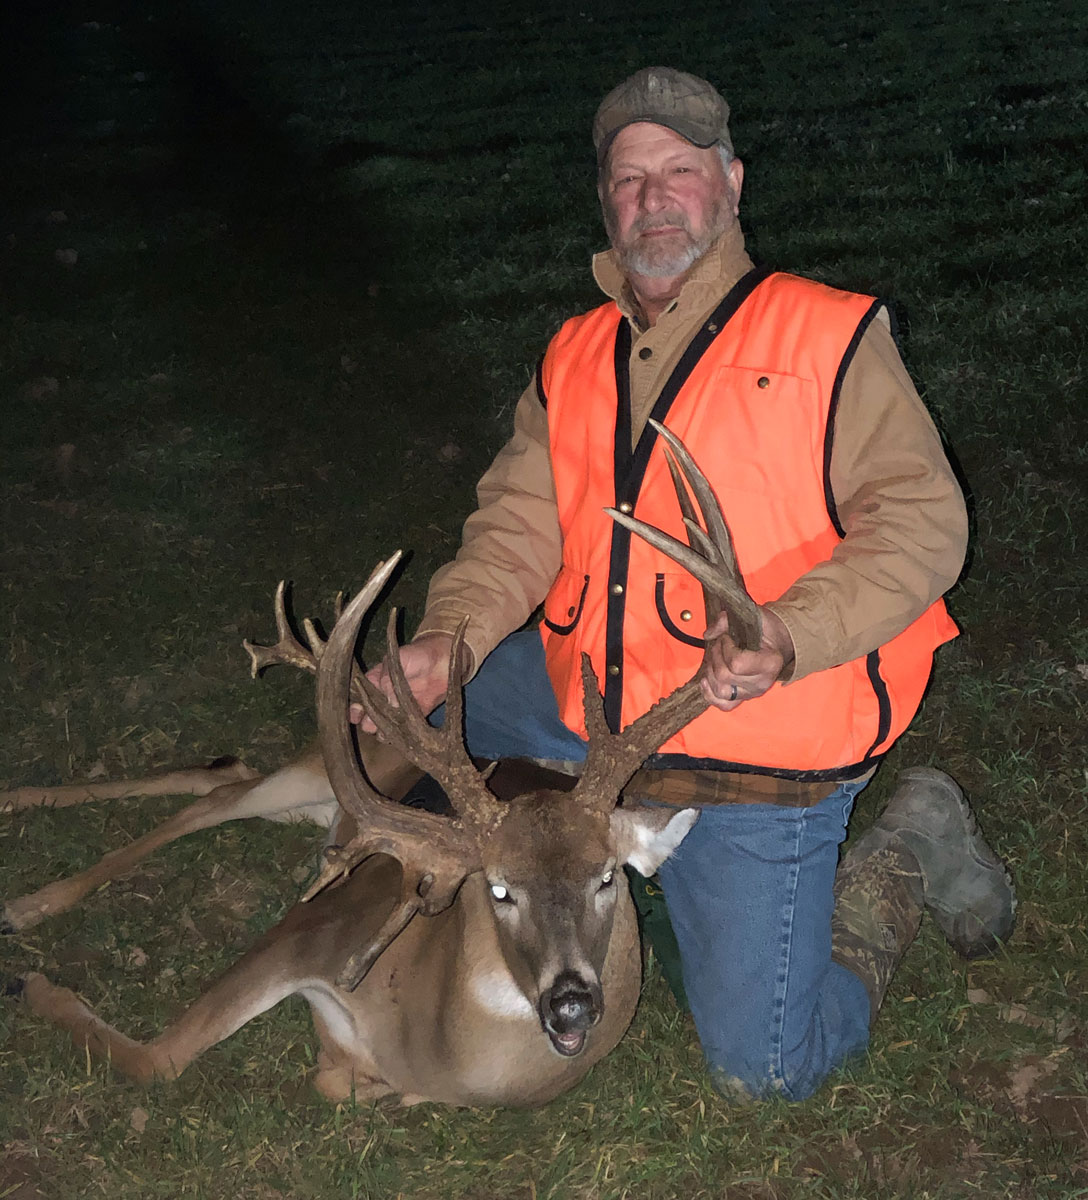 Robin Prince of Labadieville, La., killed this Humphreys County giant on Dec. 11.